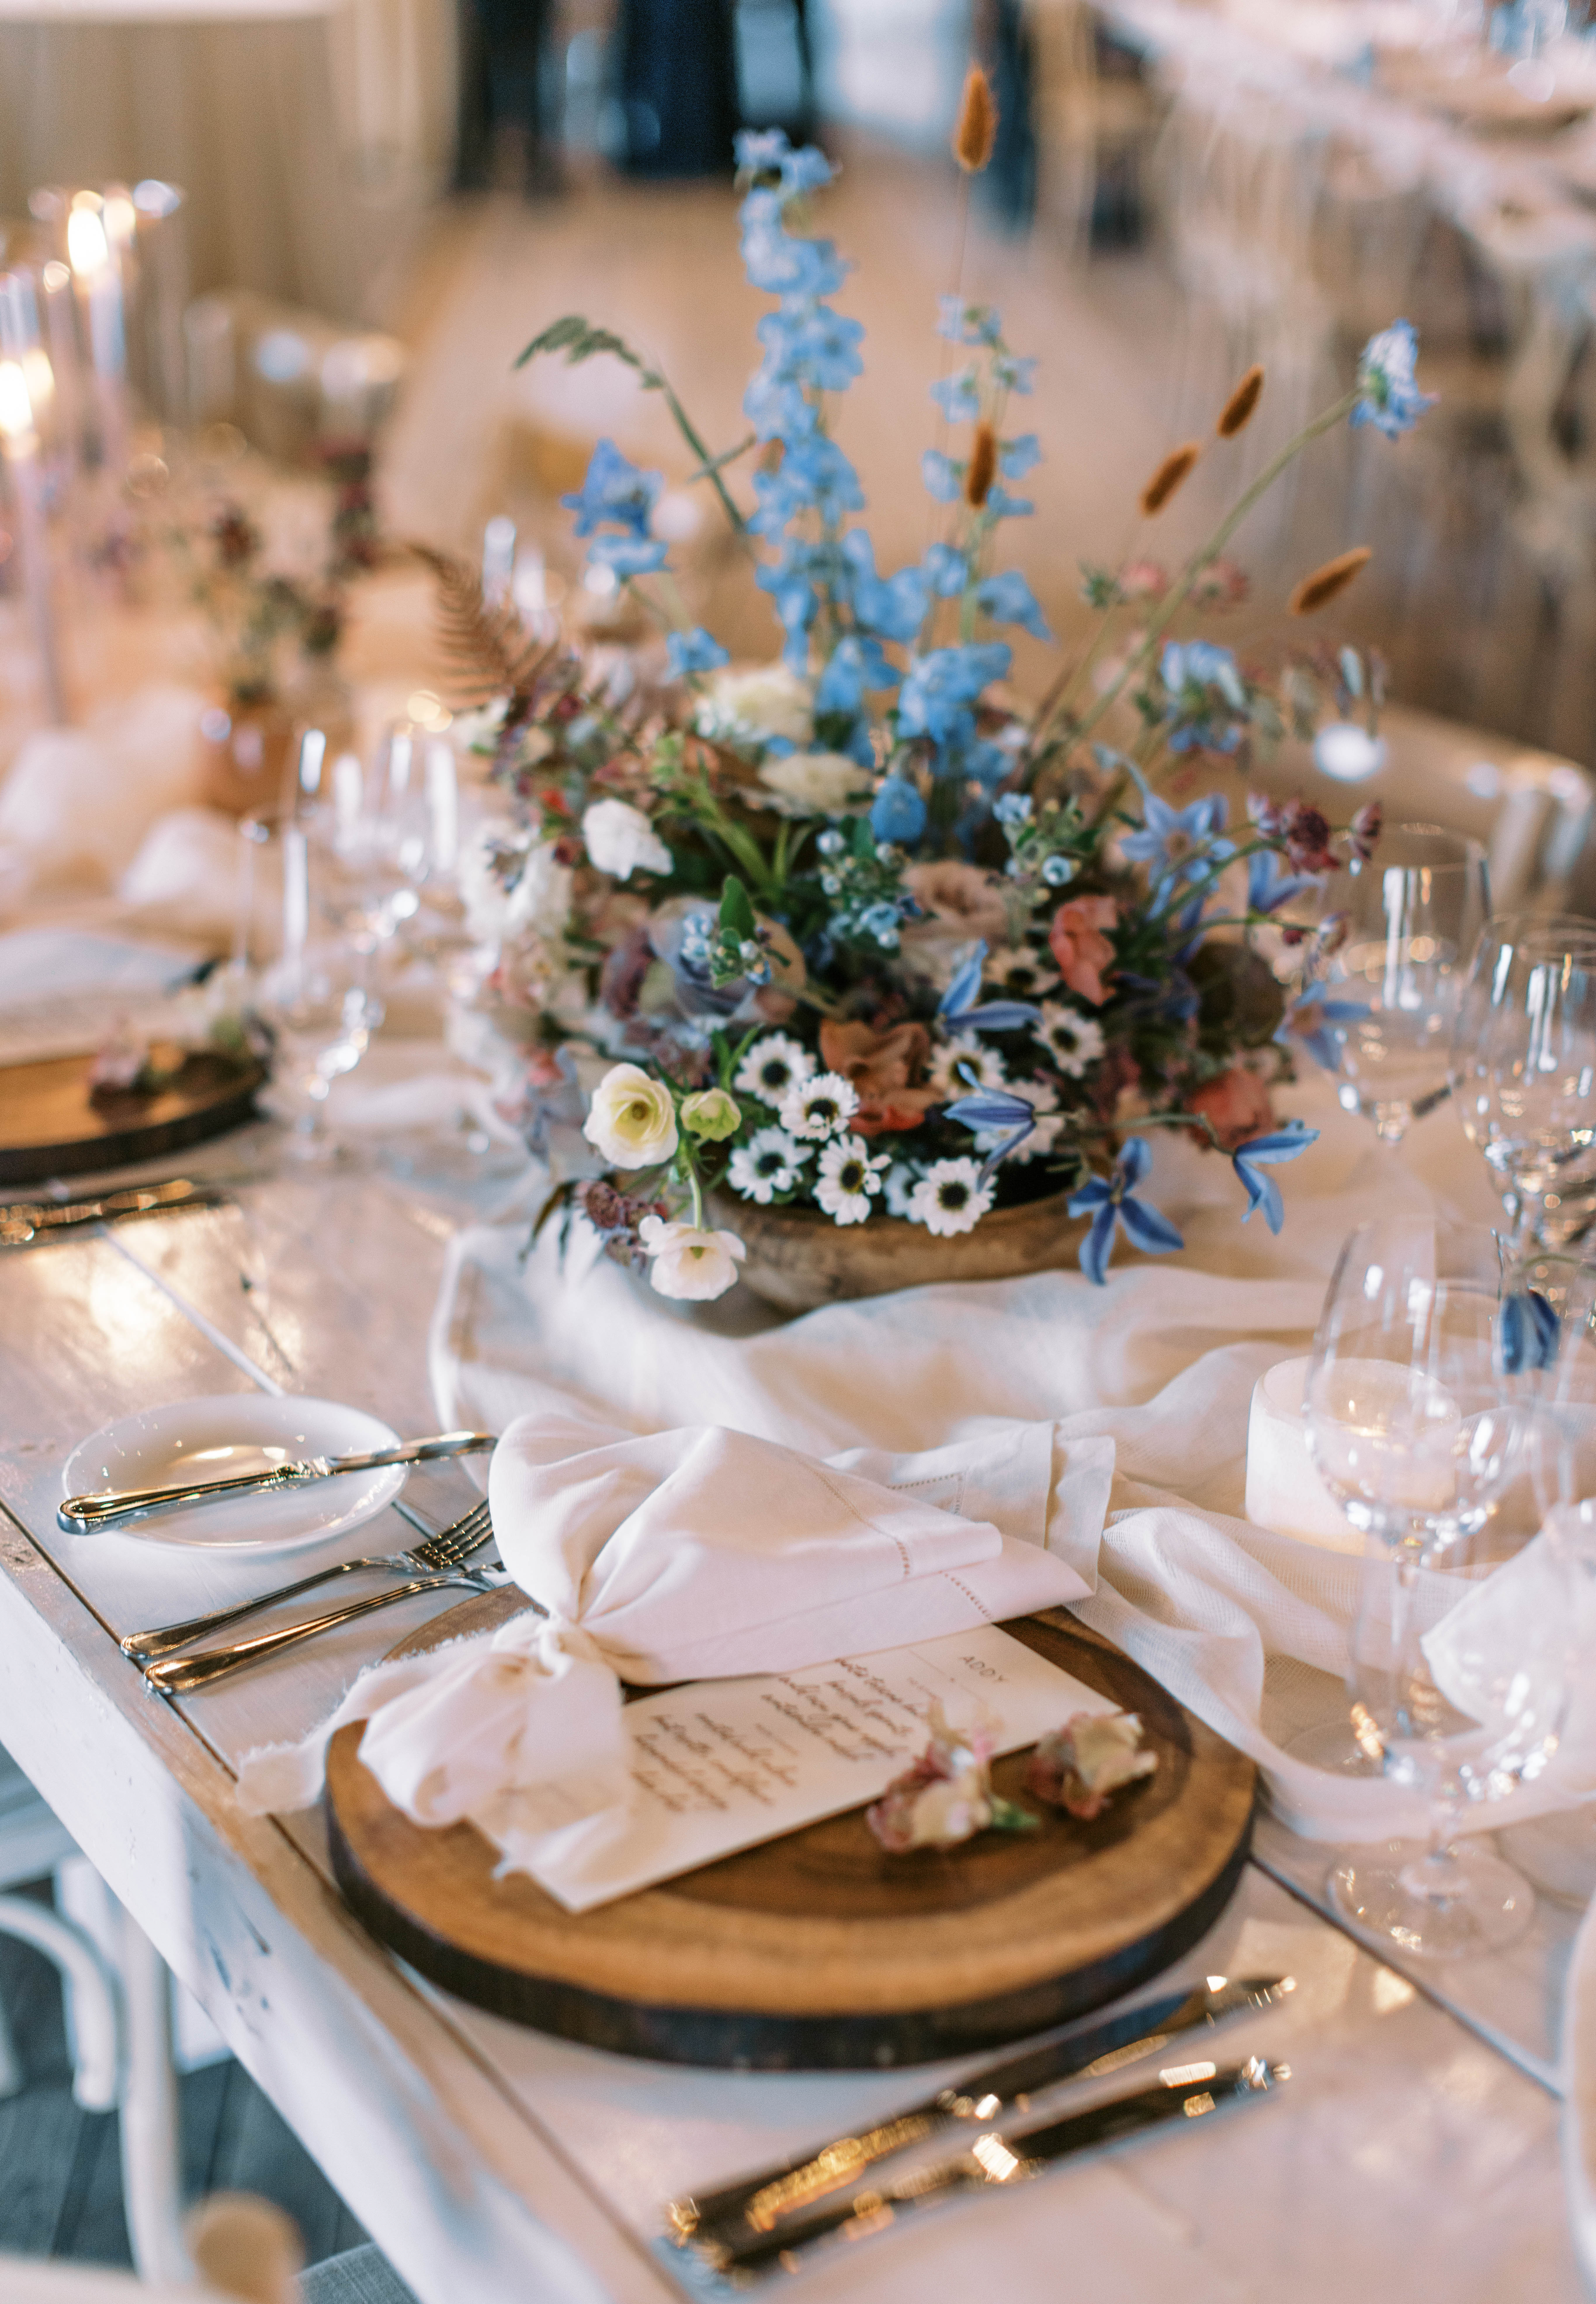 eclectic wildflower wedding centerpieces at this unique utah ranch wedding. photo by megan robinson photography